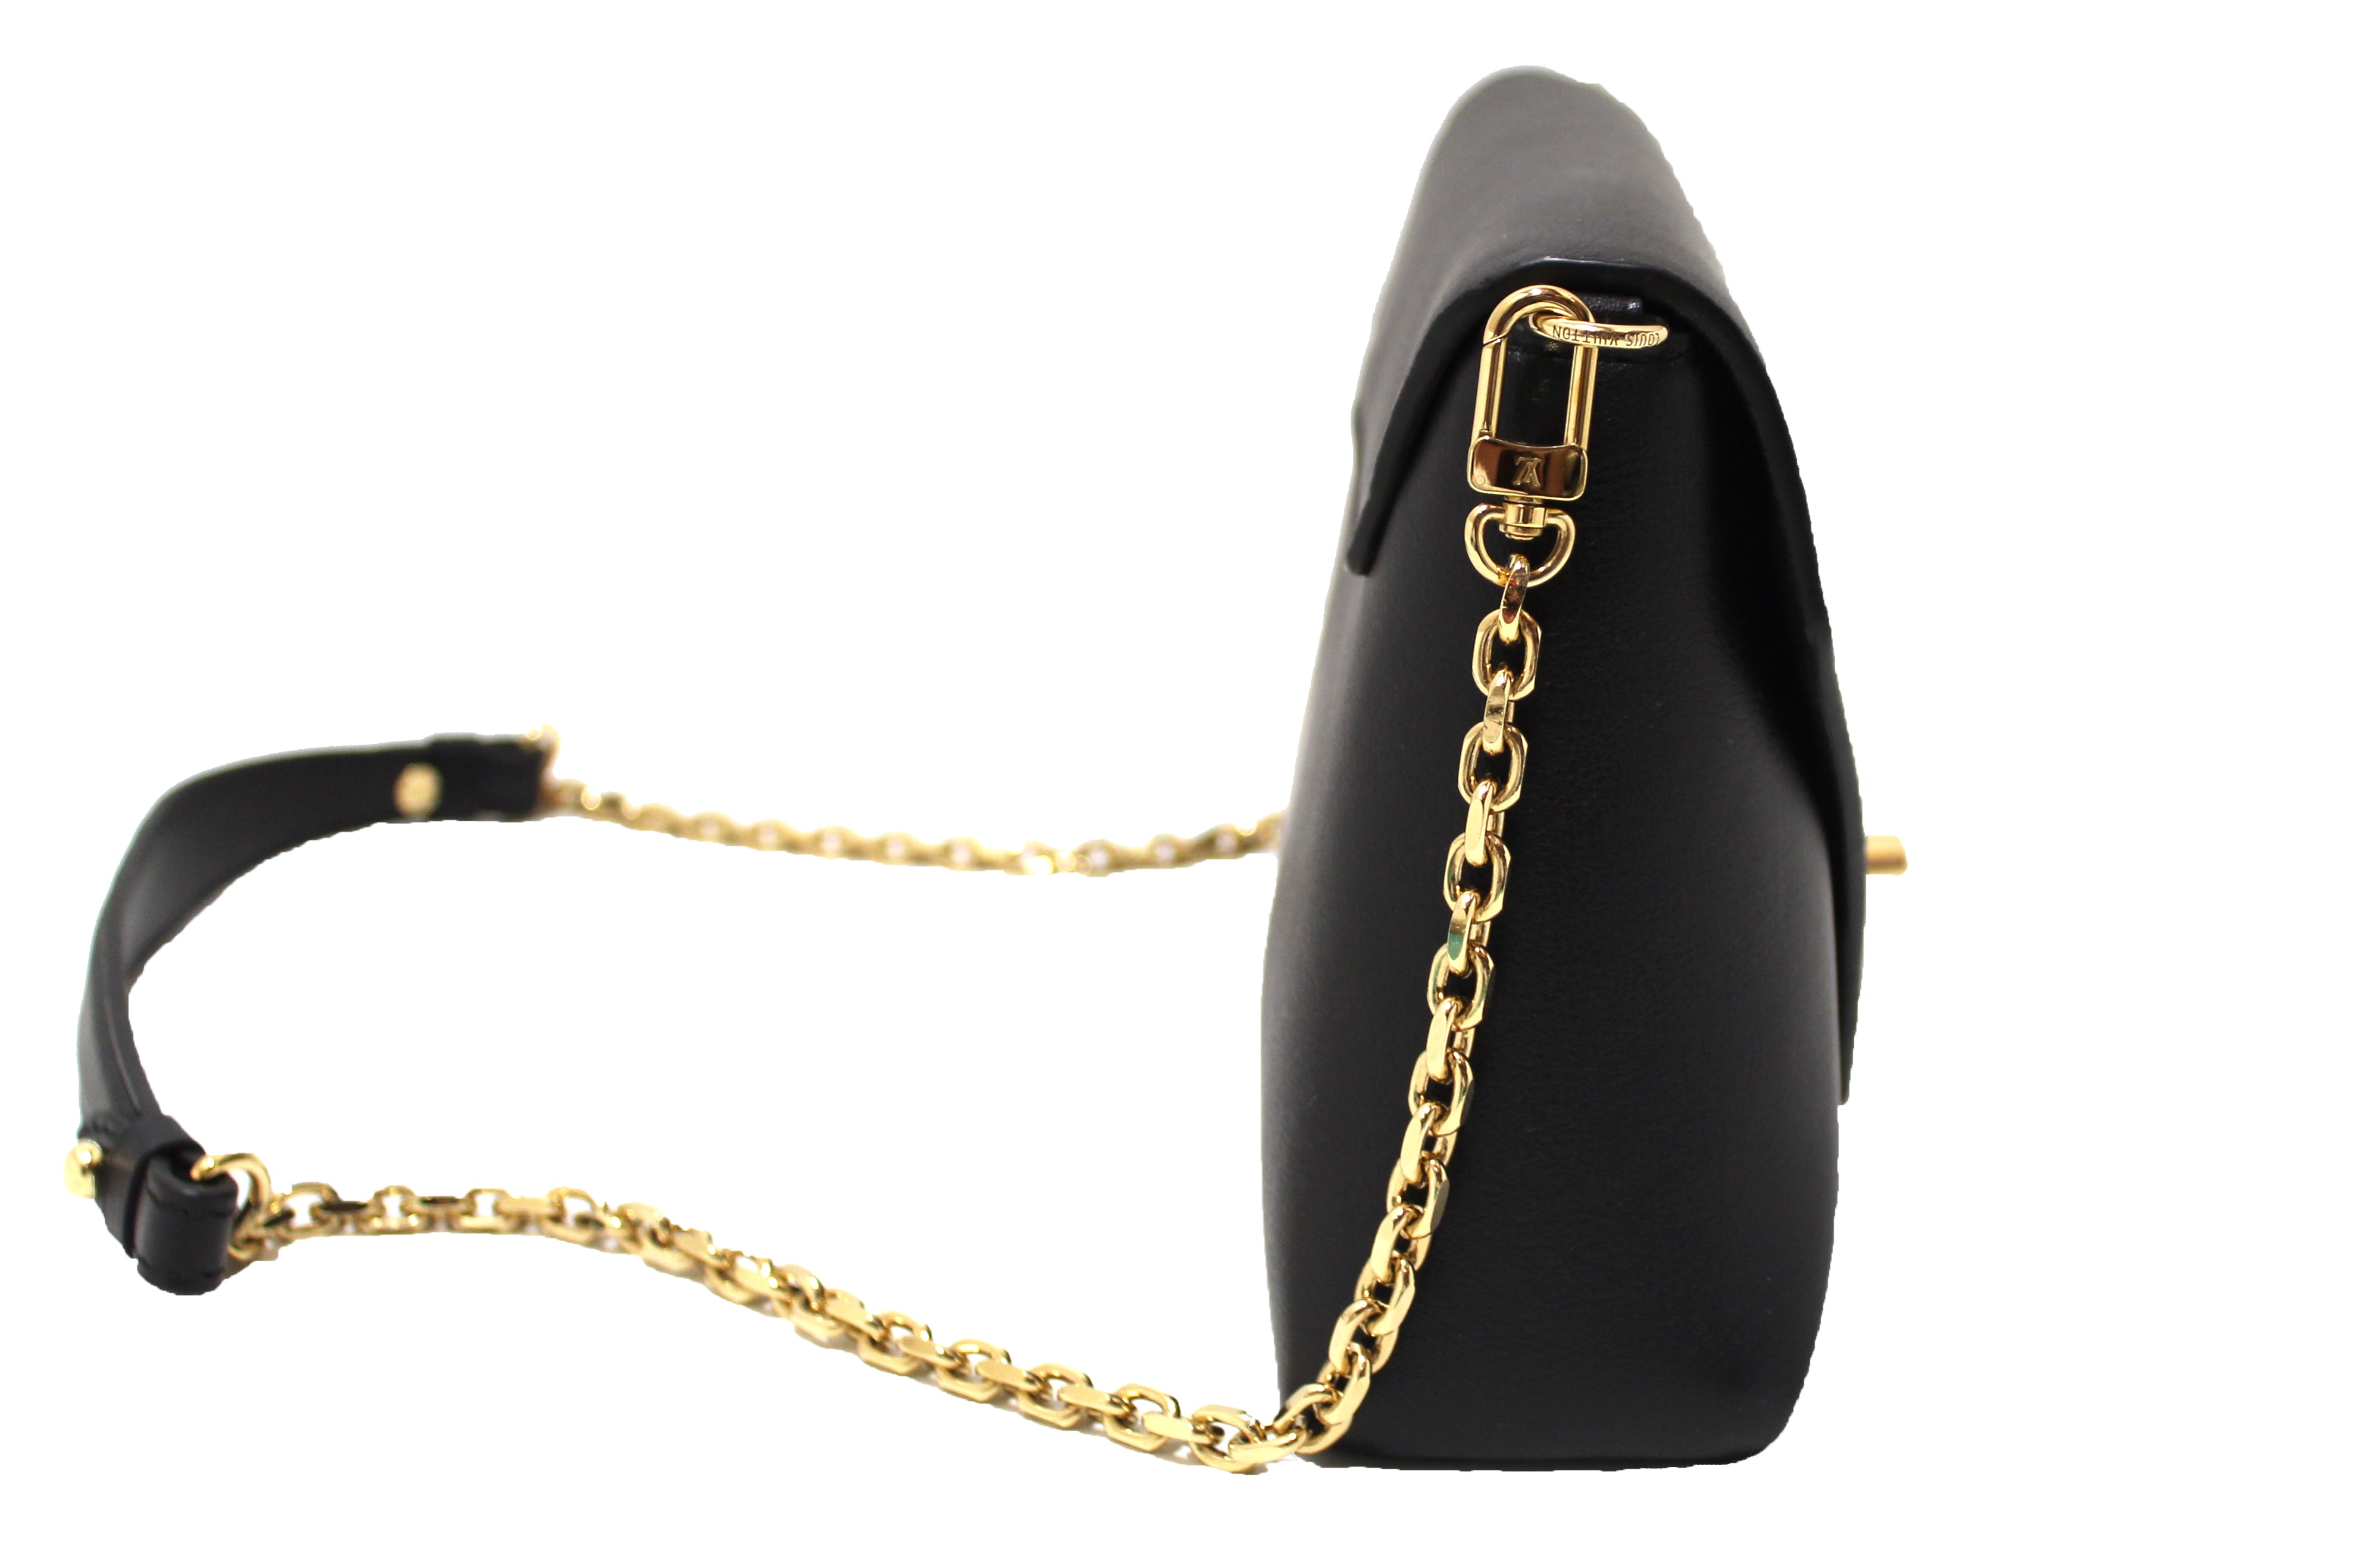 Louis Vuitton, Love note. Crafted in black leather with gold-toned LV turn-lock  closure and chain link. Turn lock closure opens to a black suede interior  with s…